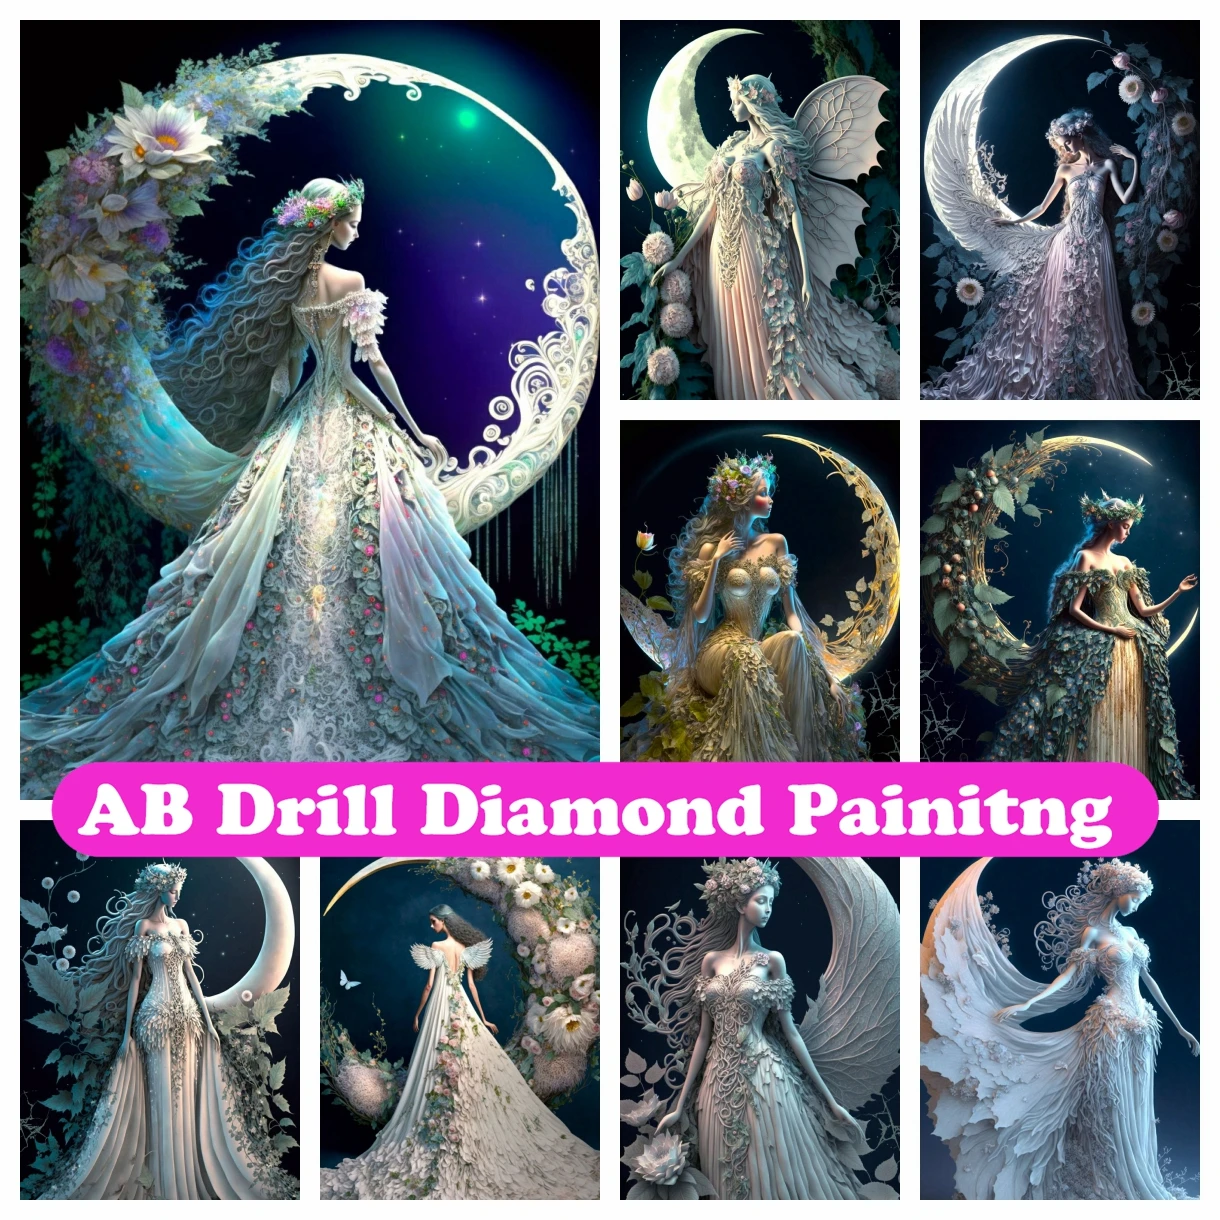 

Moon Faerie 5D AB Diamond Painting Embroidery Fantasy Goddess Girl Art Cross Stitch Mosaic Handicraft Pictures Craft Home Decor